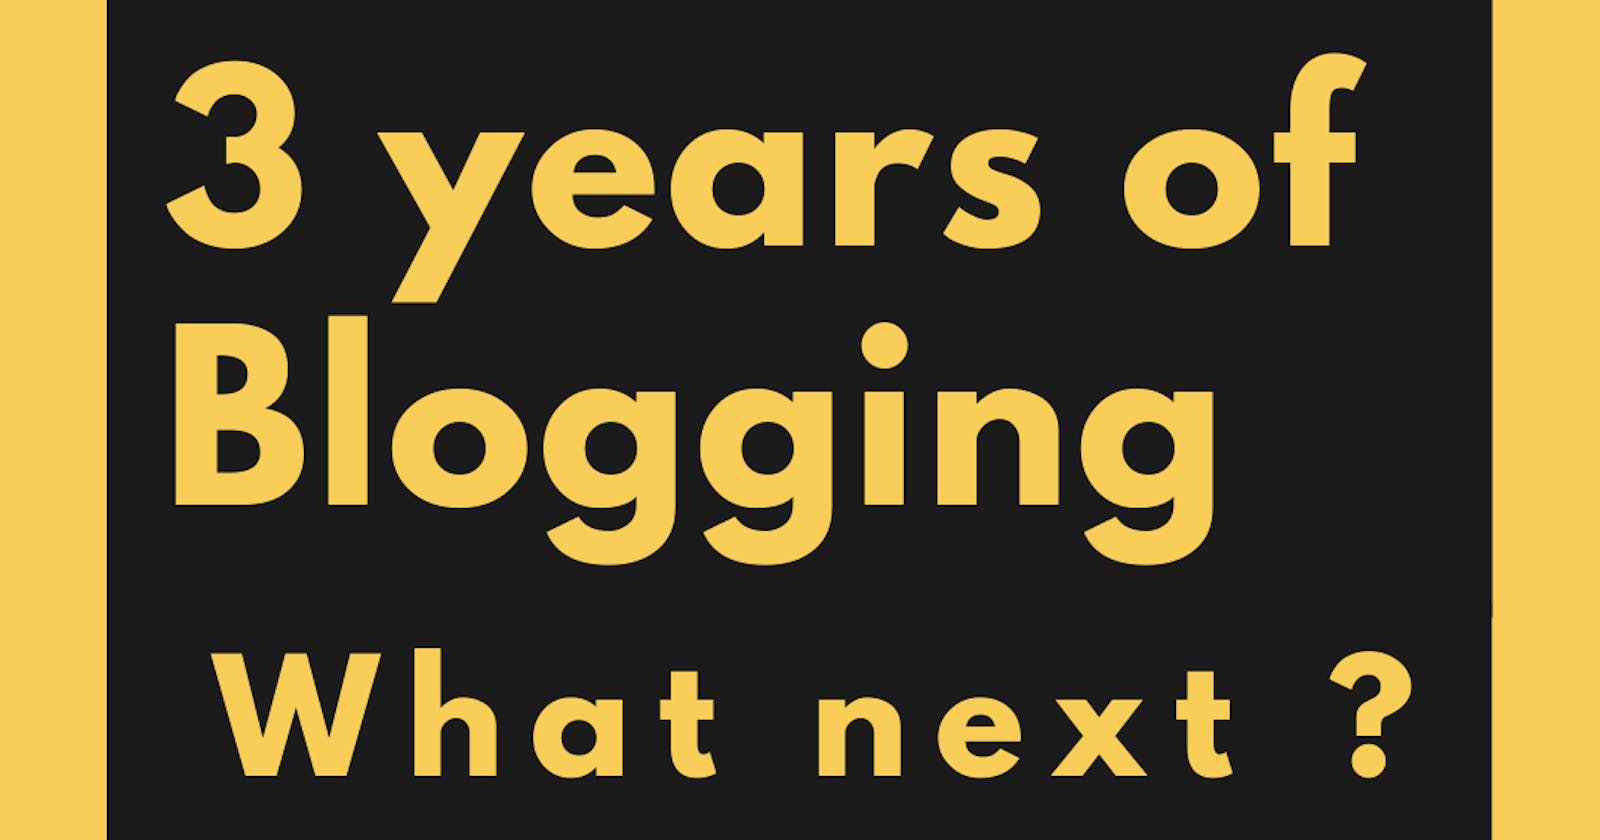 3 years of Blogging, what Next?